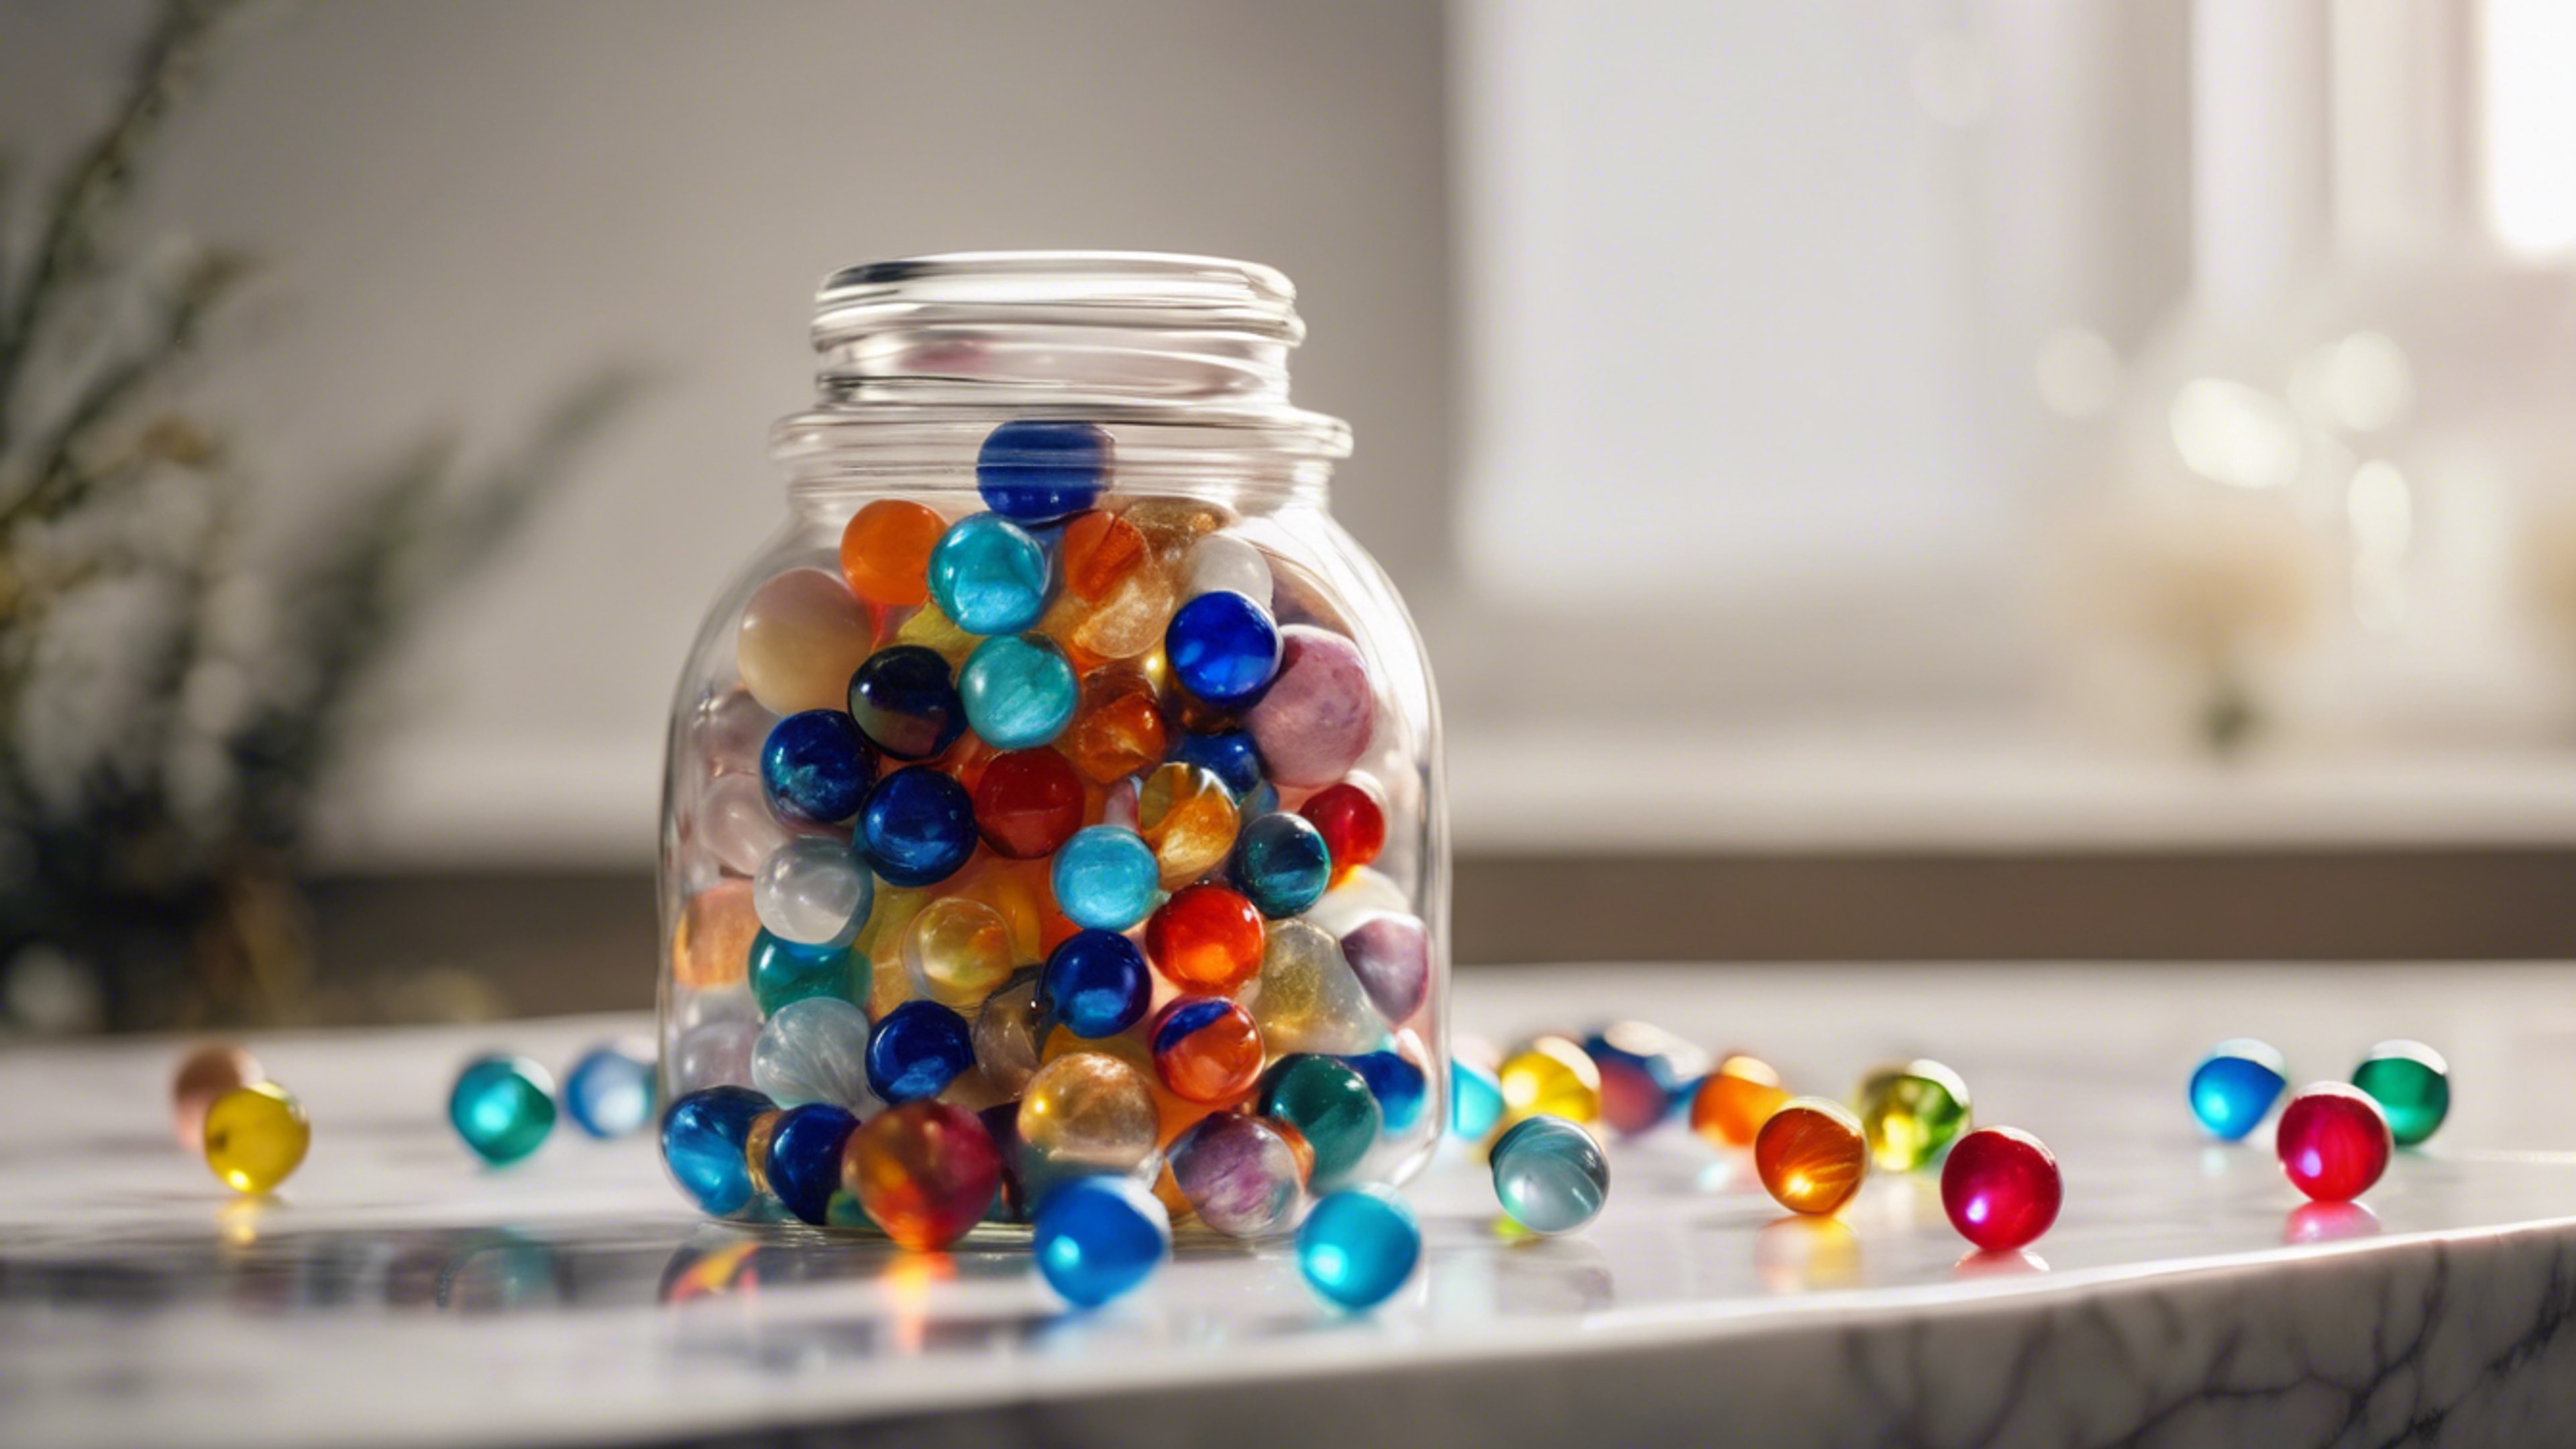 A glass jar full of colorful marbles with glinting lights around them, placed on a white marble surface. Papel de parede[9438bf9259b84d3ca042]